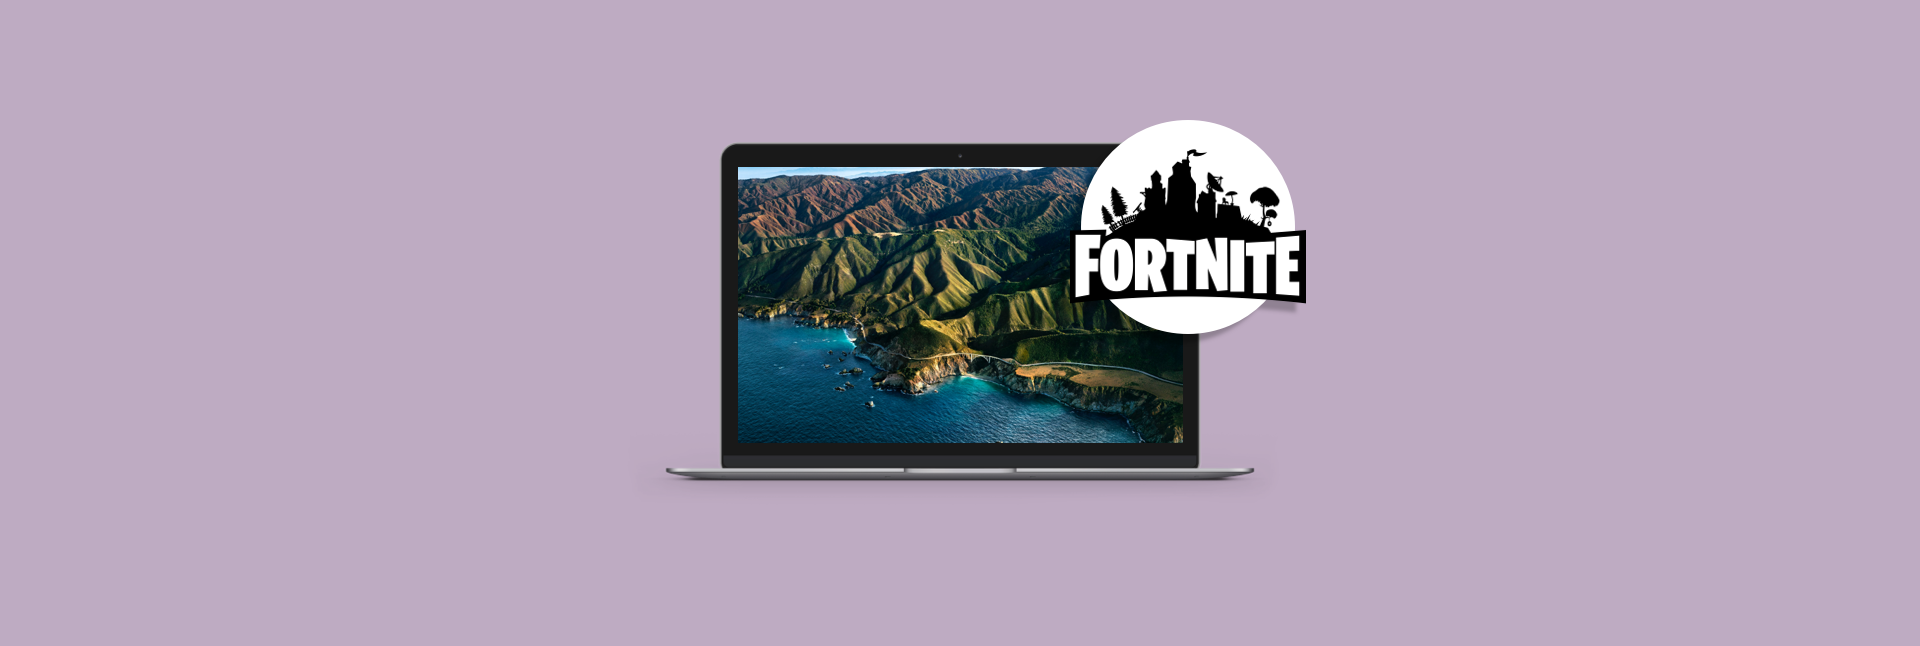 mimimum requirements for fortnite on mac